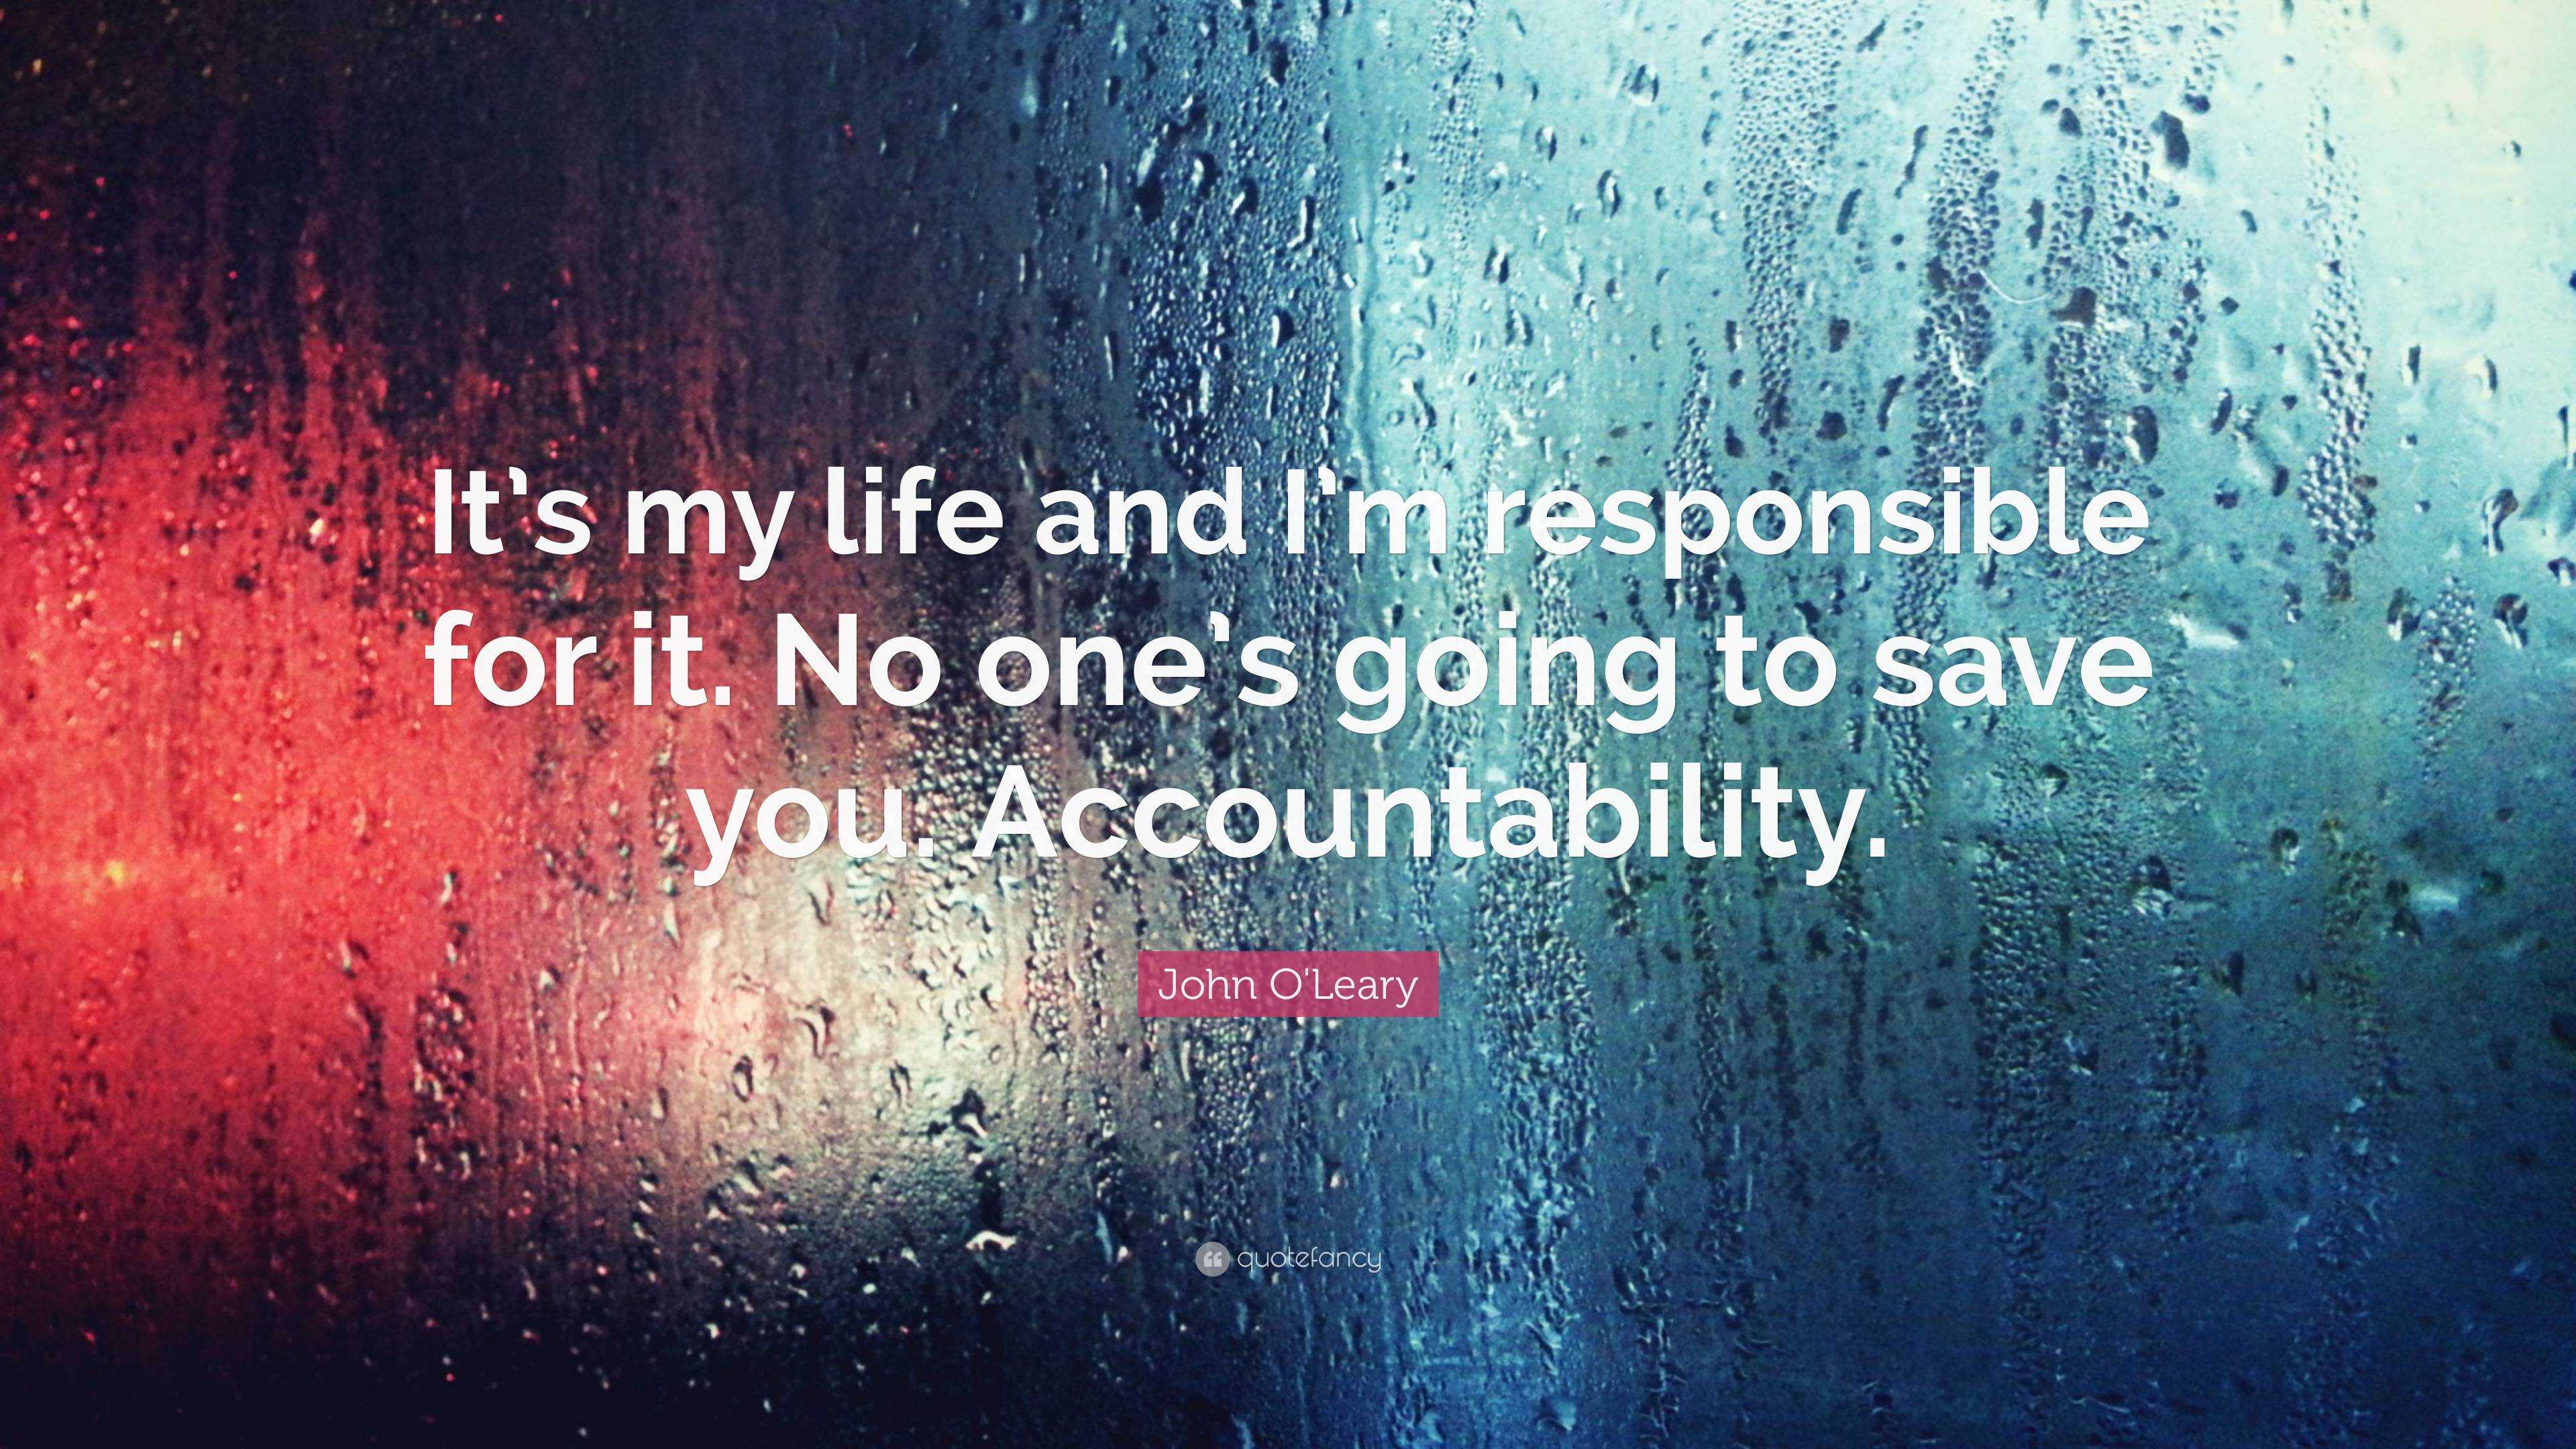 John O'Leary Quote: “It's my life and I'm responsible for it. No one's going